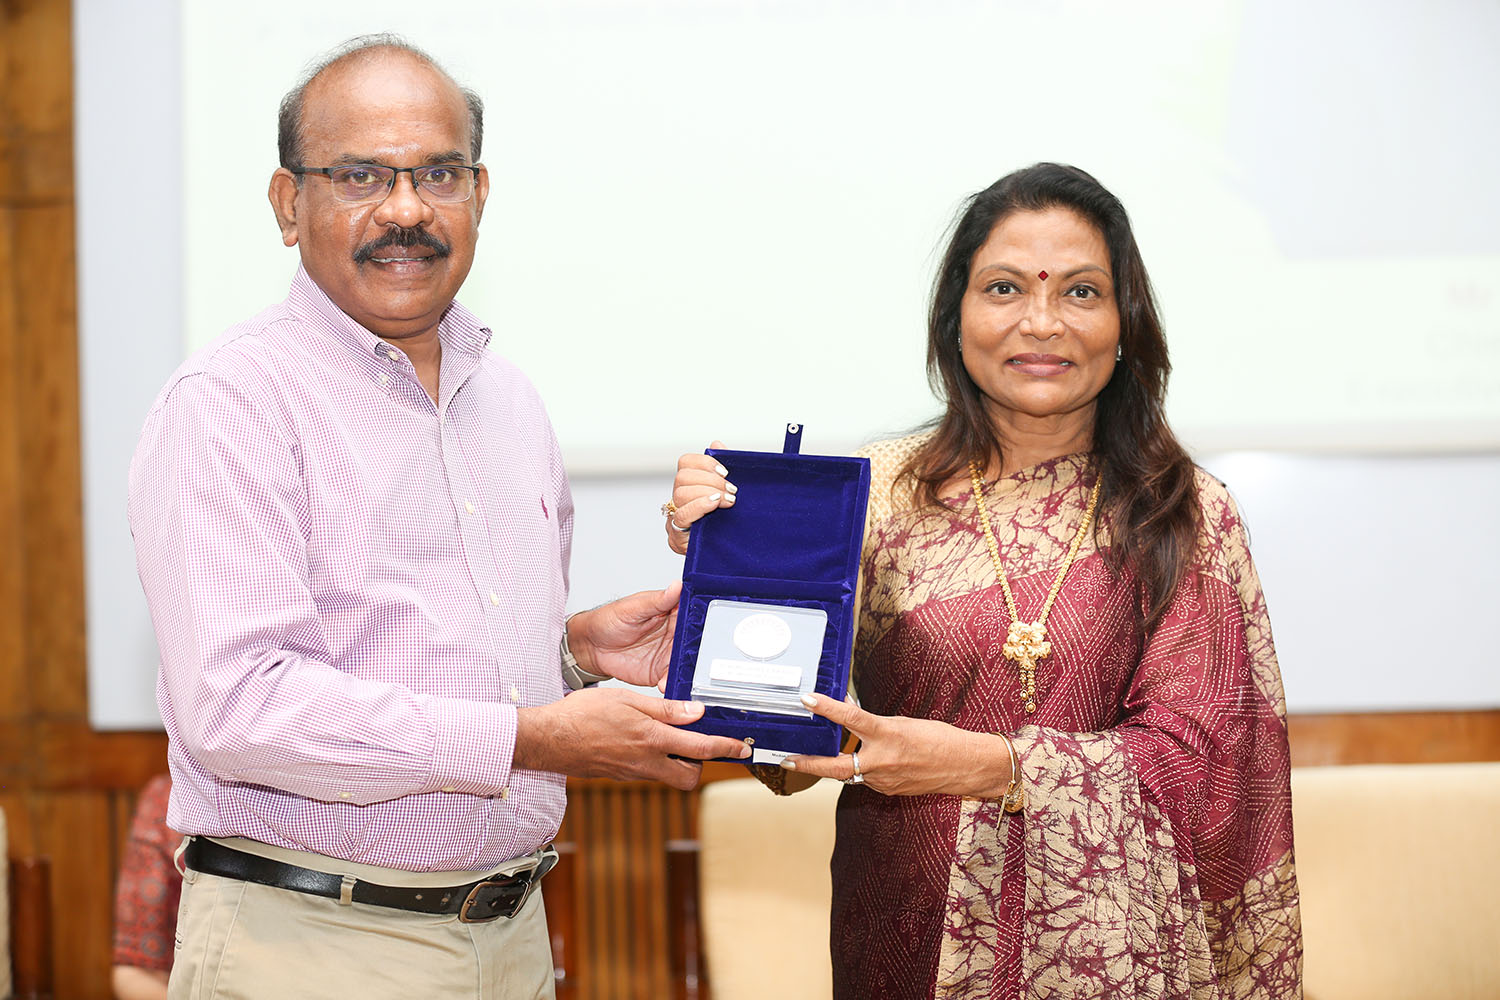 Mr Madan Mohan Raj, Chief Programme Officer, Executive Education Programmes, receives the award for 10 years of service from Ms. Kalpana Saroj, Member of the Board of Governors, IIMB, during the institute’s 49th Foundation Day celebrations.